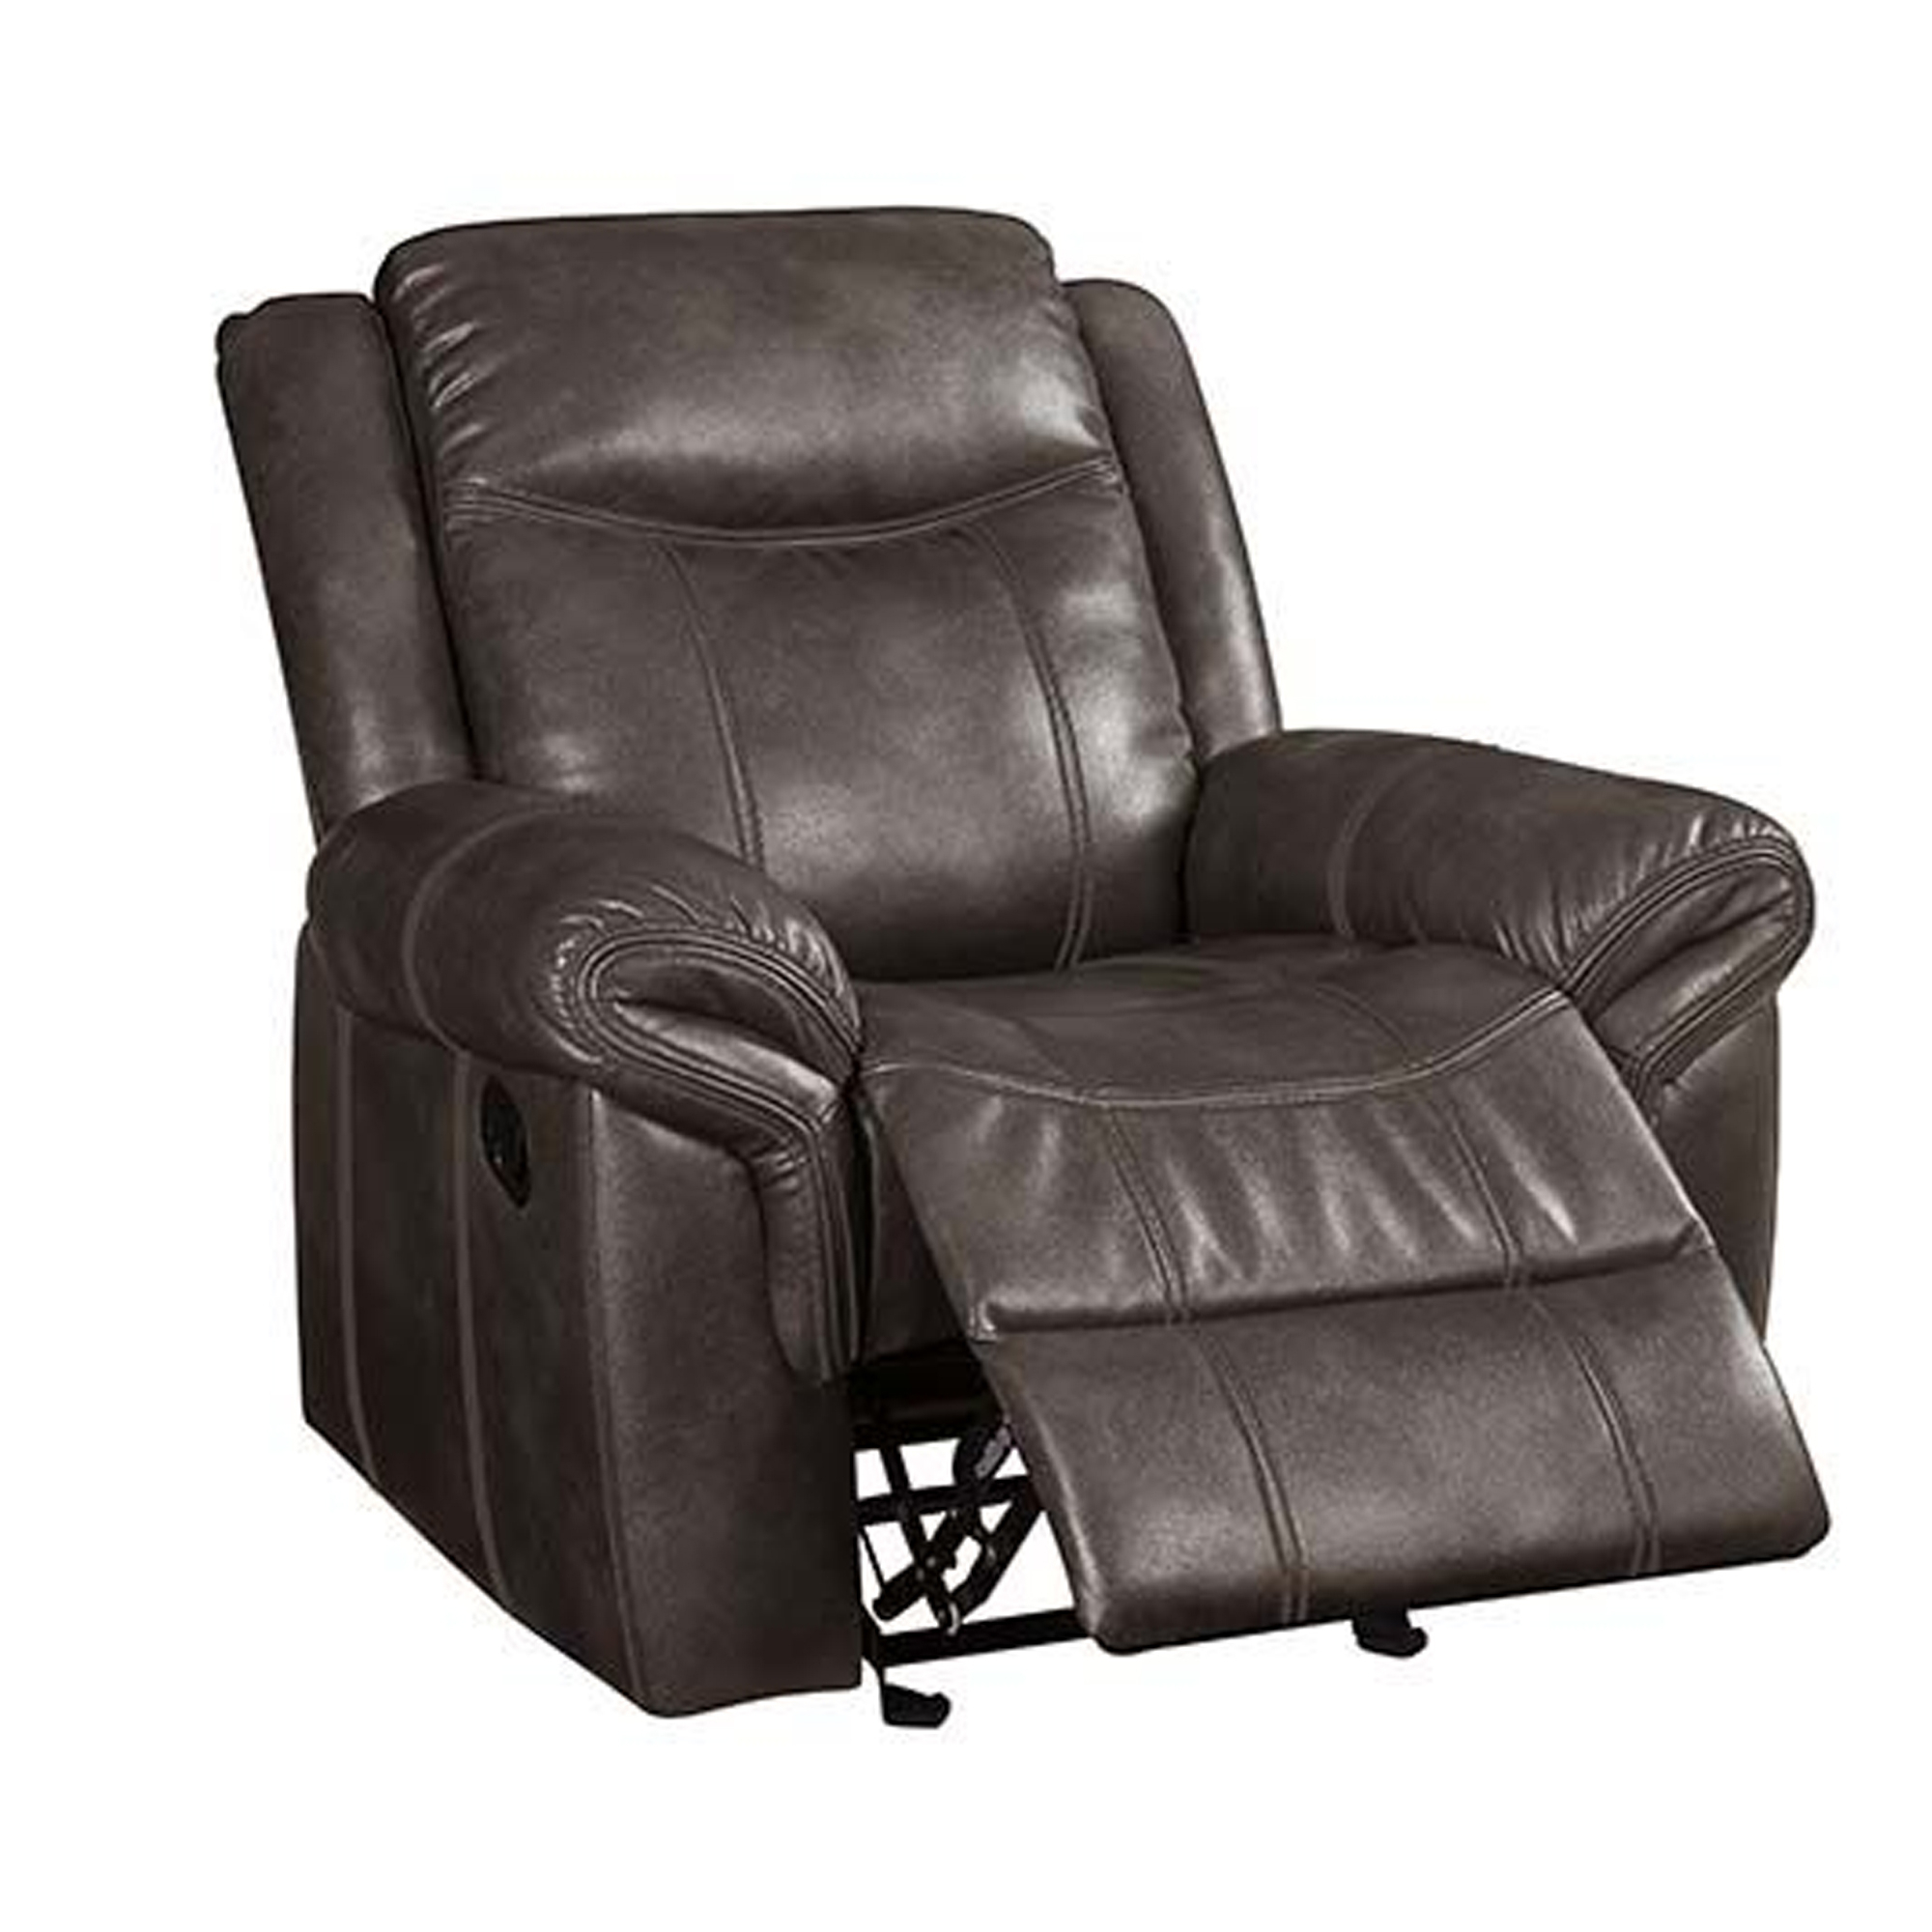 Glider Recliner With Leatherette Upholstery And Pillow Arms, Brown- Saltoro Sherpi